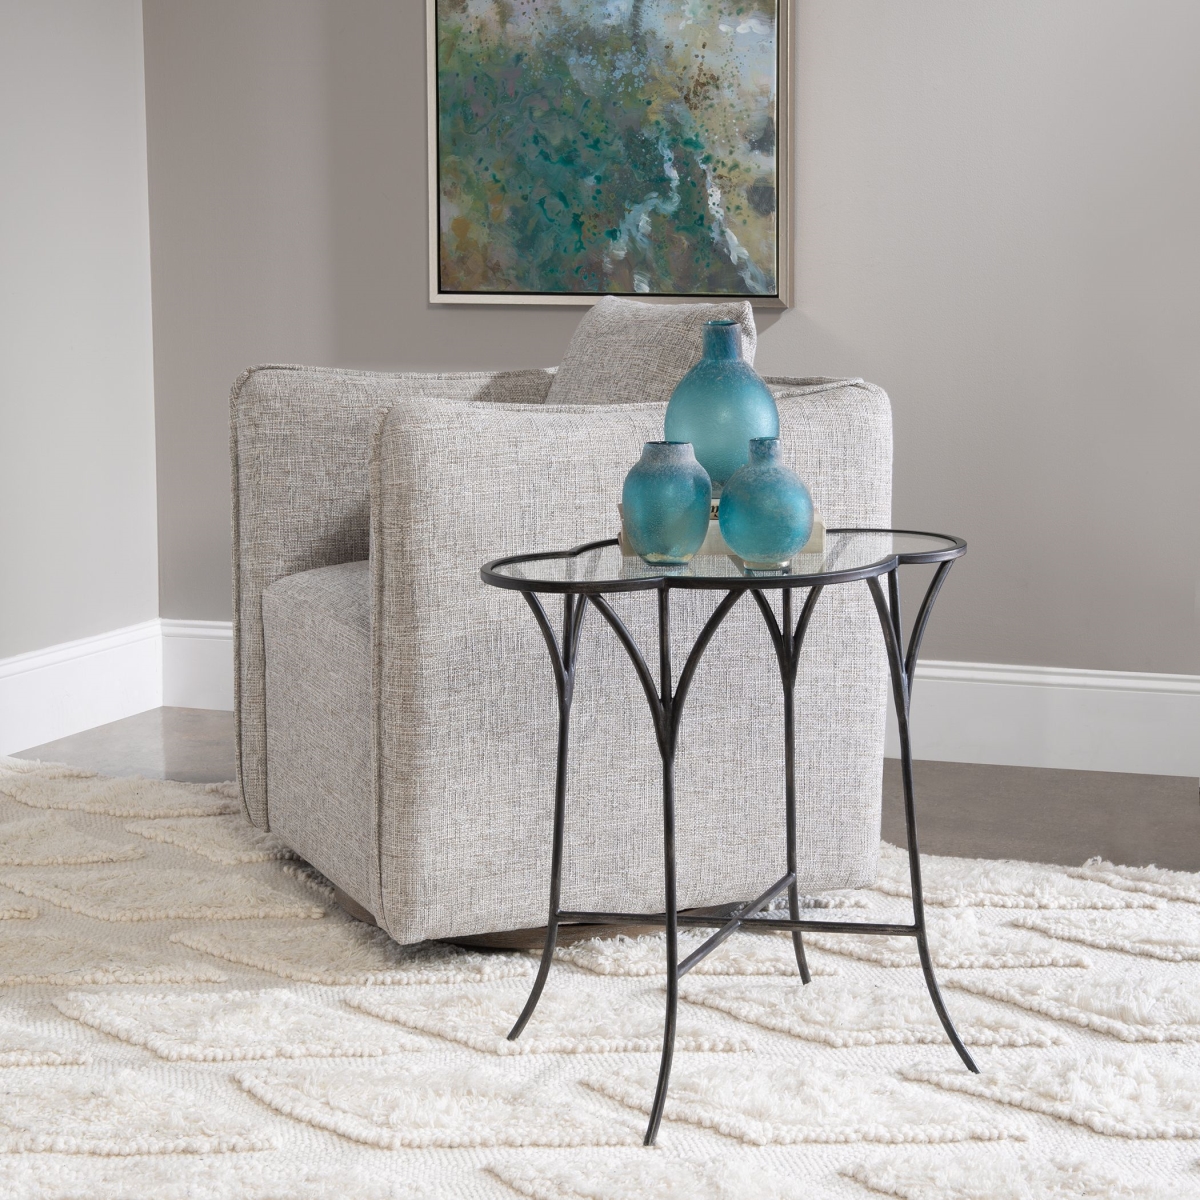 Picture of 212 Main 25368 27 x 28.5 x 18.5 in. Adhira Glass Accent Table